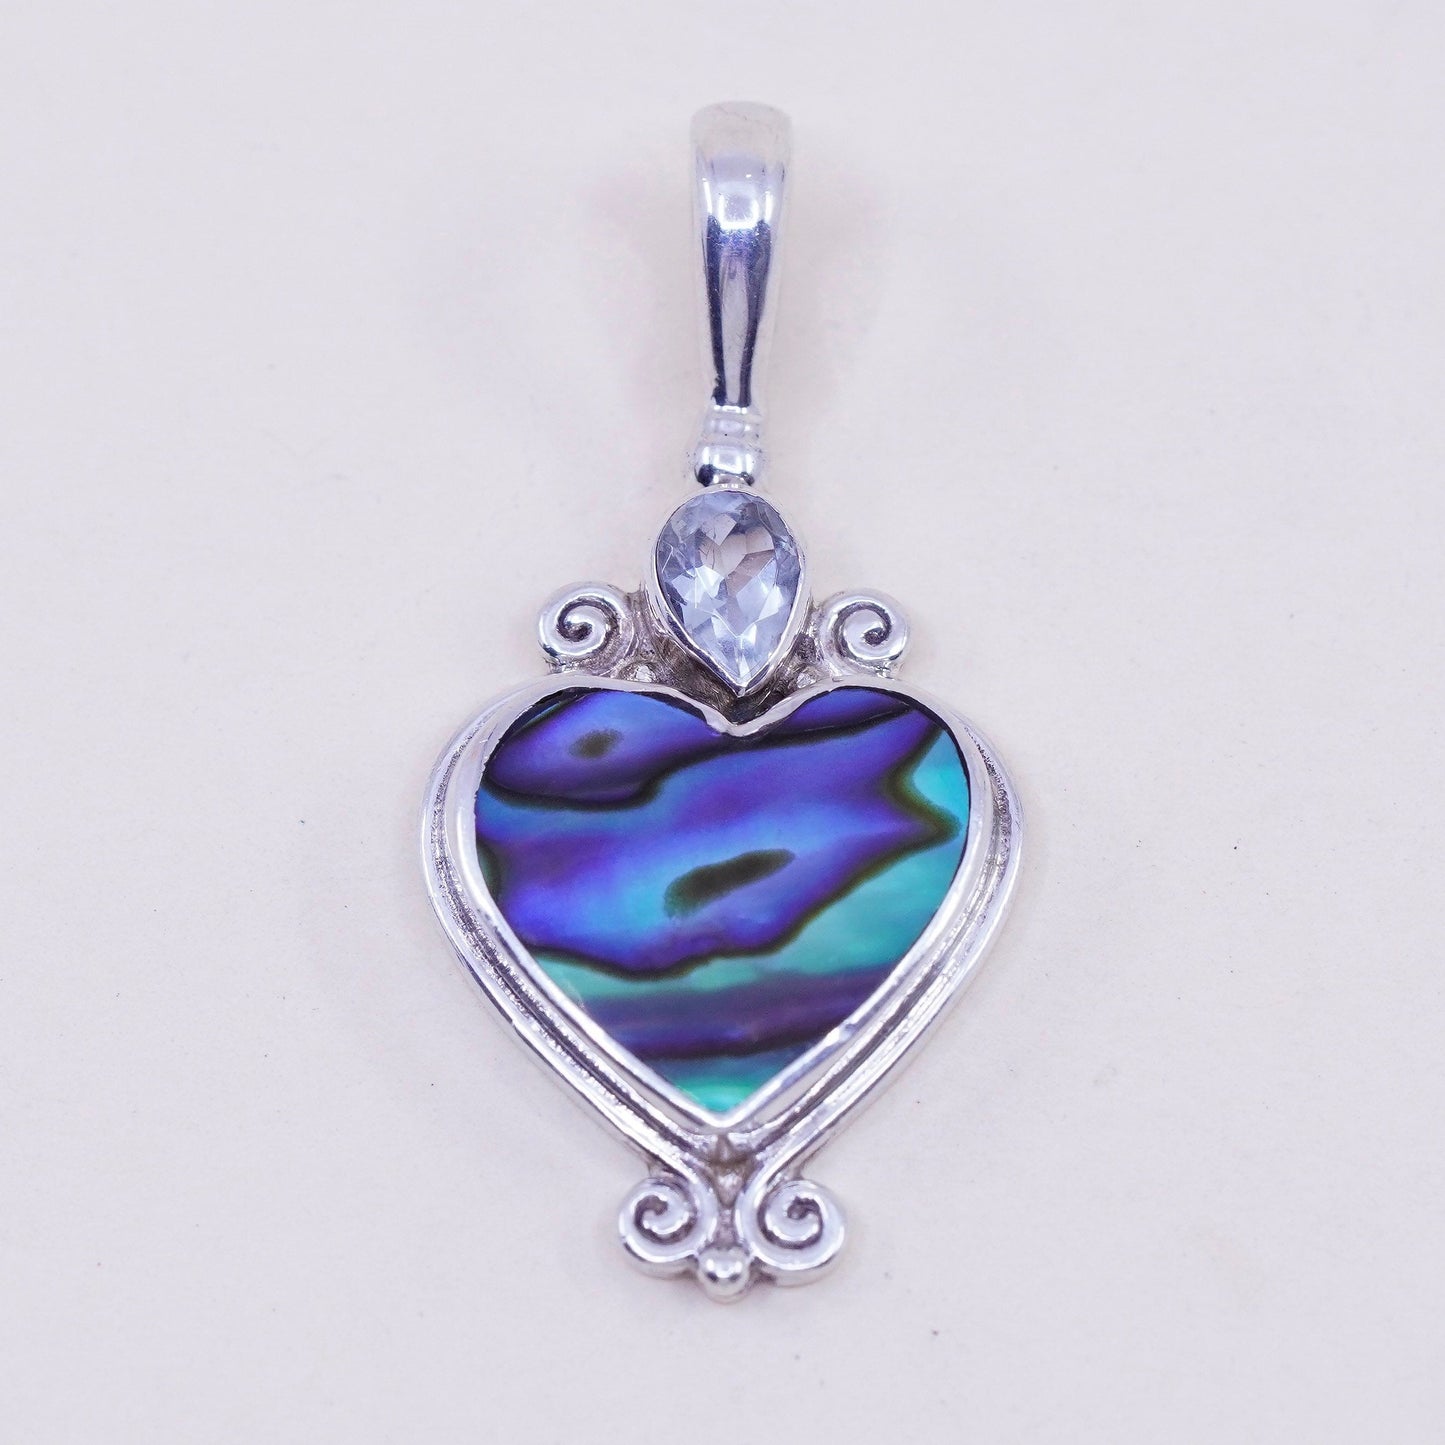 Vintage sajen Sterling 925 silver heart pendant with abalone and topaz